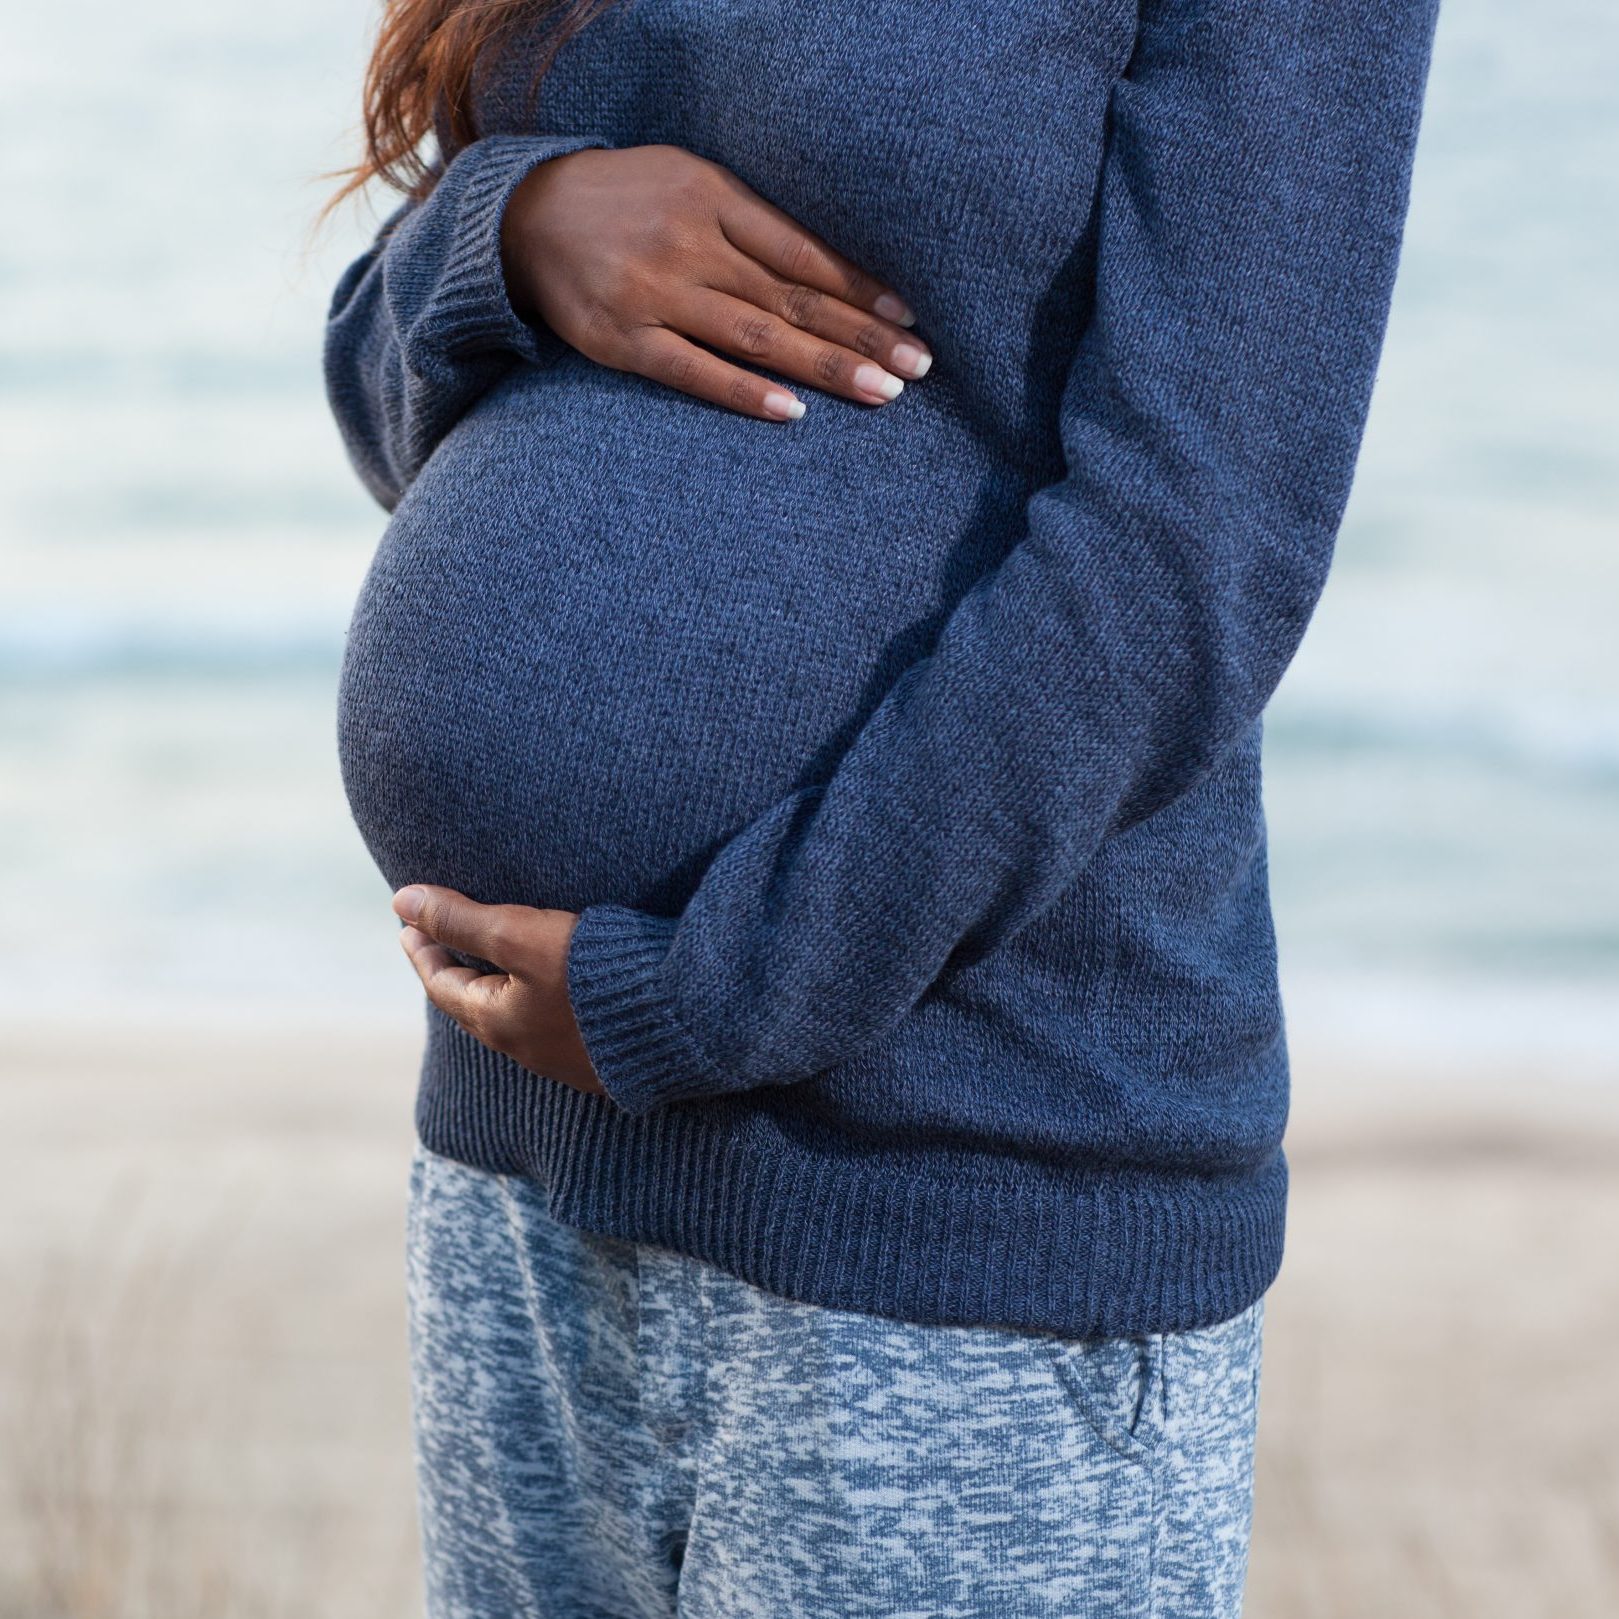 A pregnant woman wraps her hands around her baby bump.